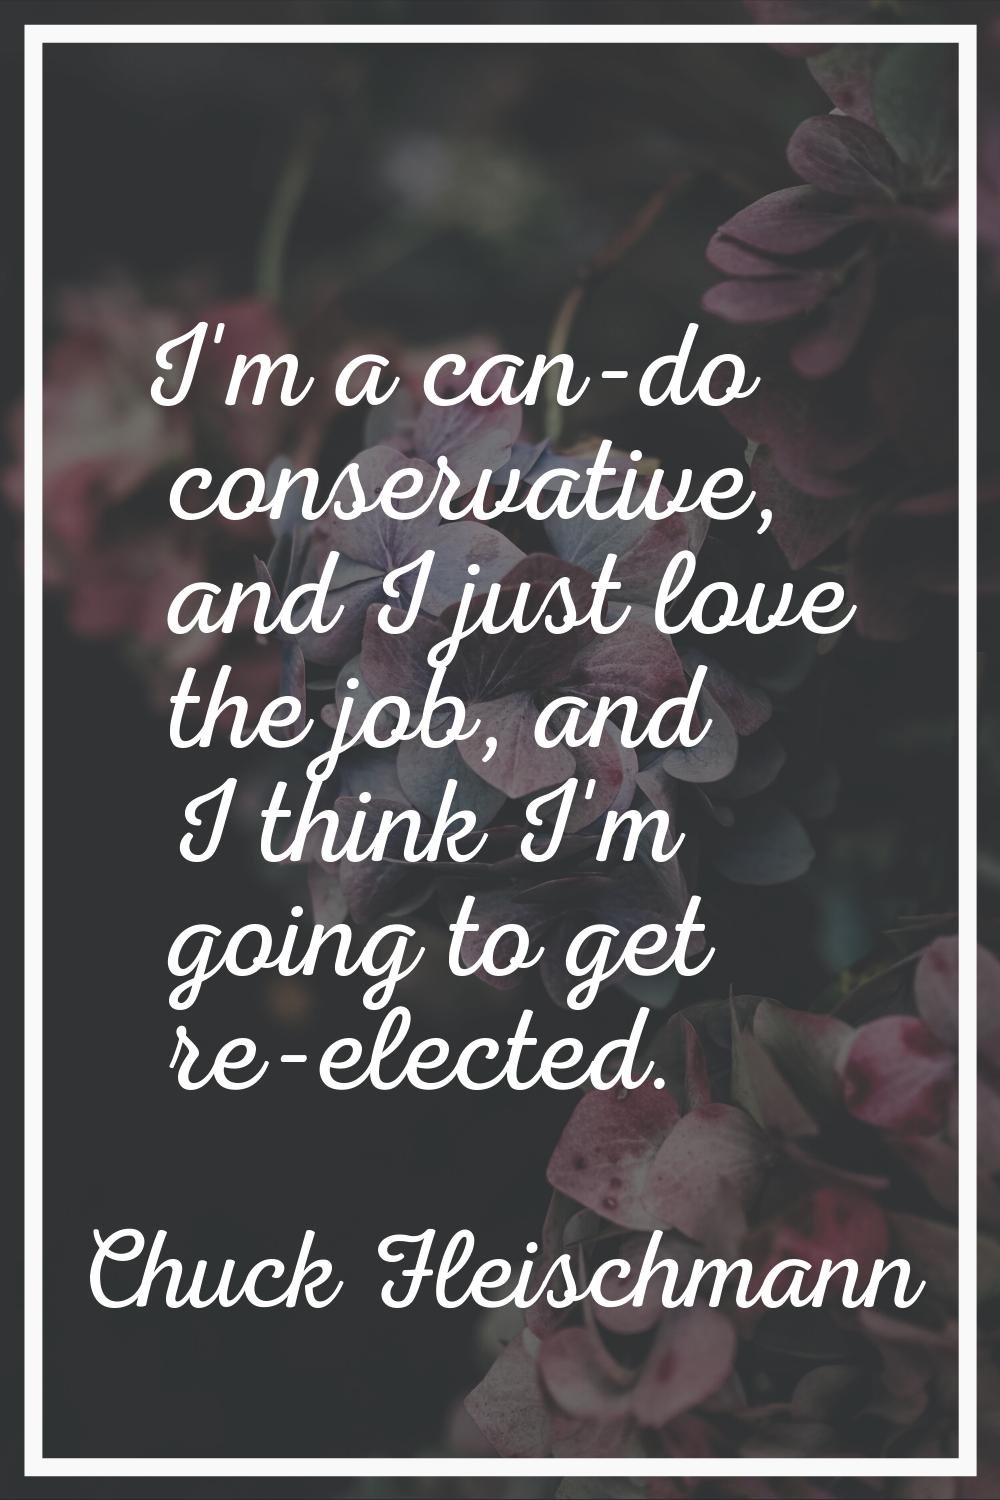 I'm a can-do conservative, and I just love the job, and I think I'm going to get re-elected.